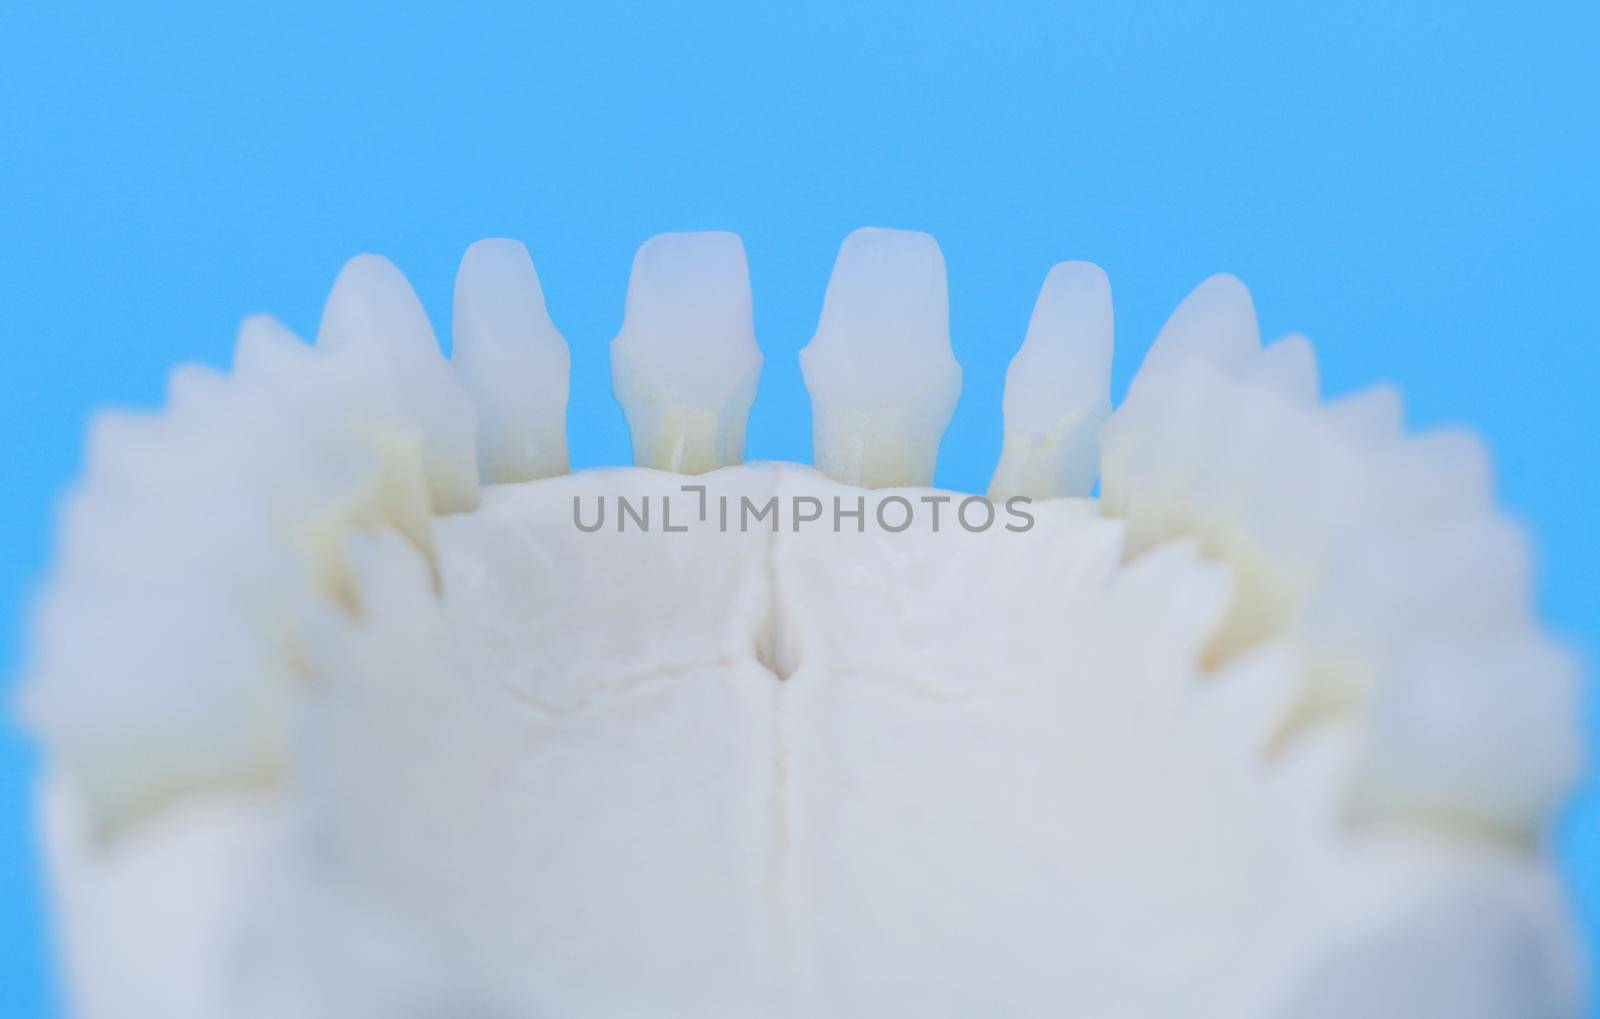 Lower human jaw with teeth anatomy model medical illustration isolated on blue background. Healthy teeth, dental care and orthodontic concept